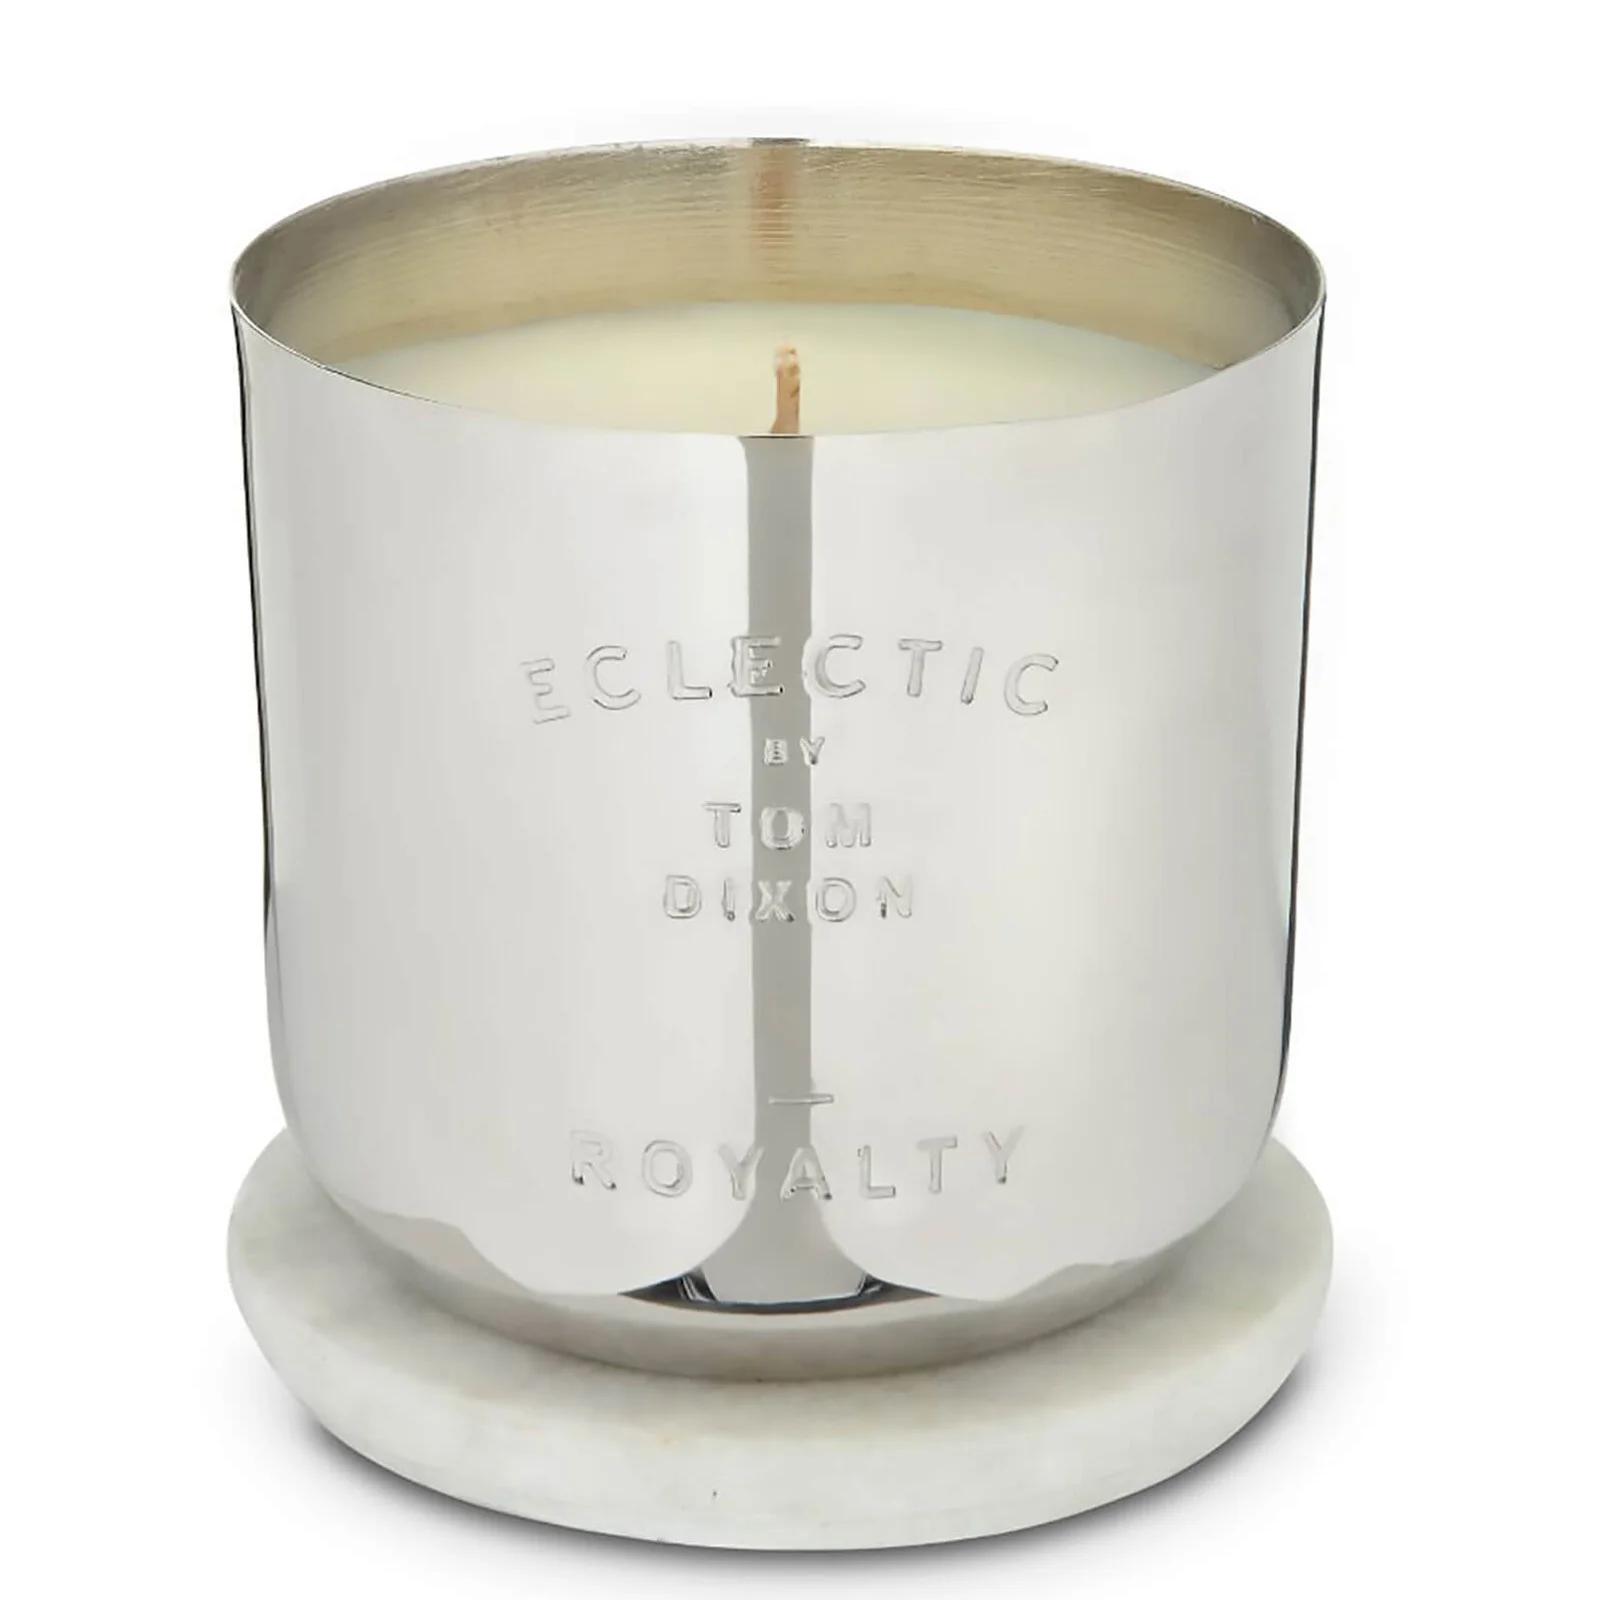 Tom Dixon Scented Candle - Royalty Image 1